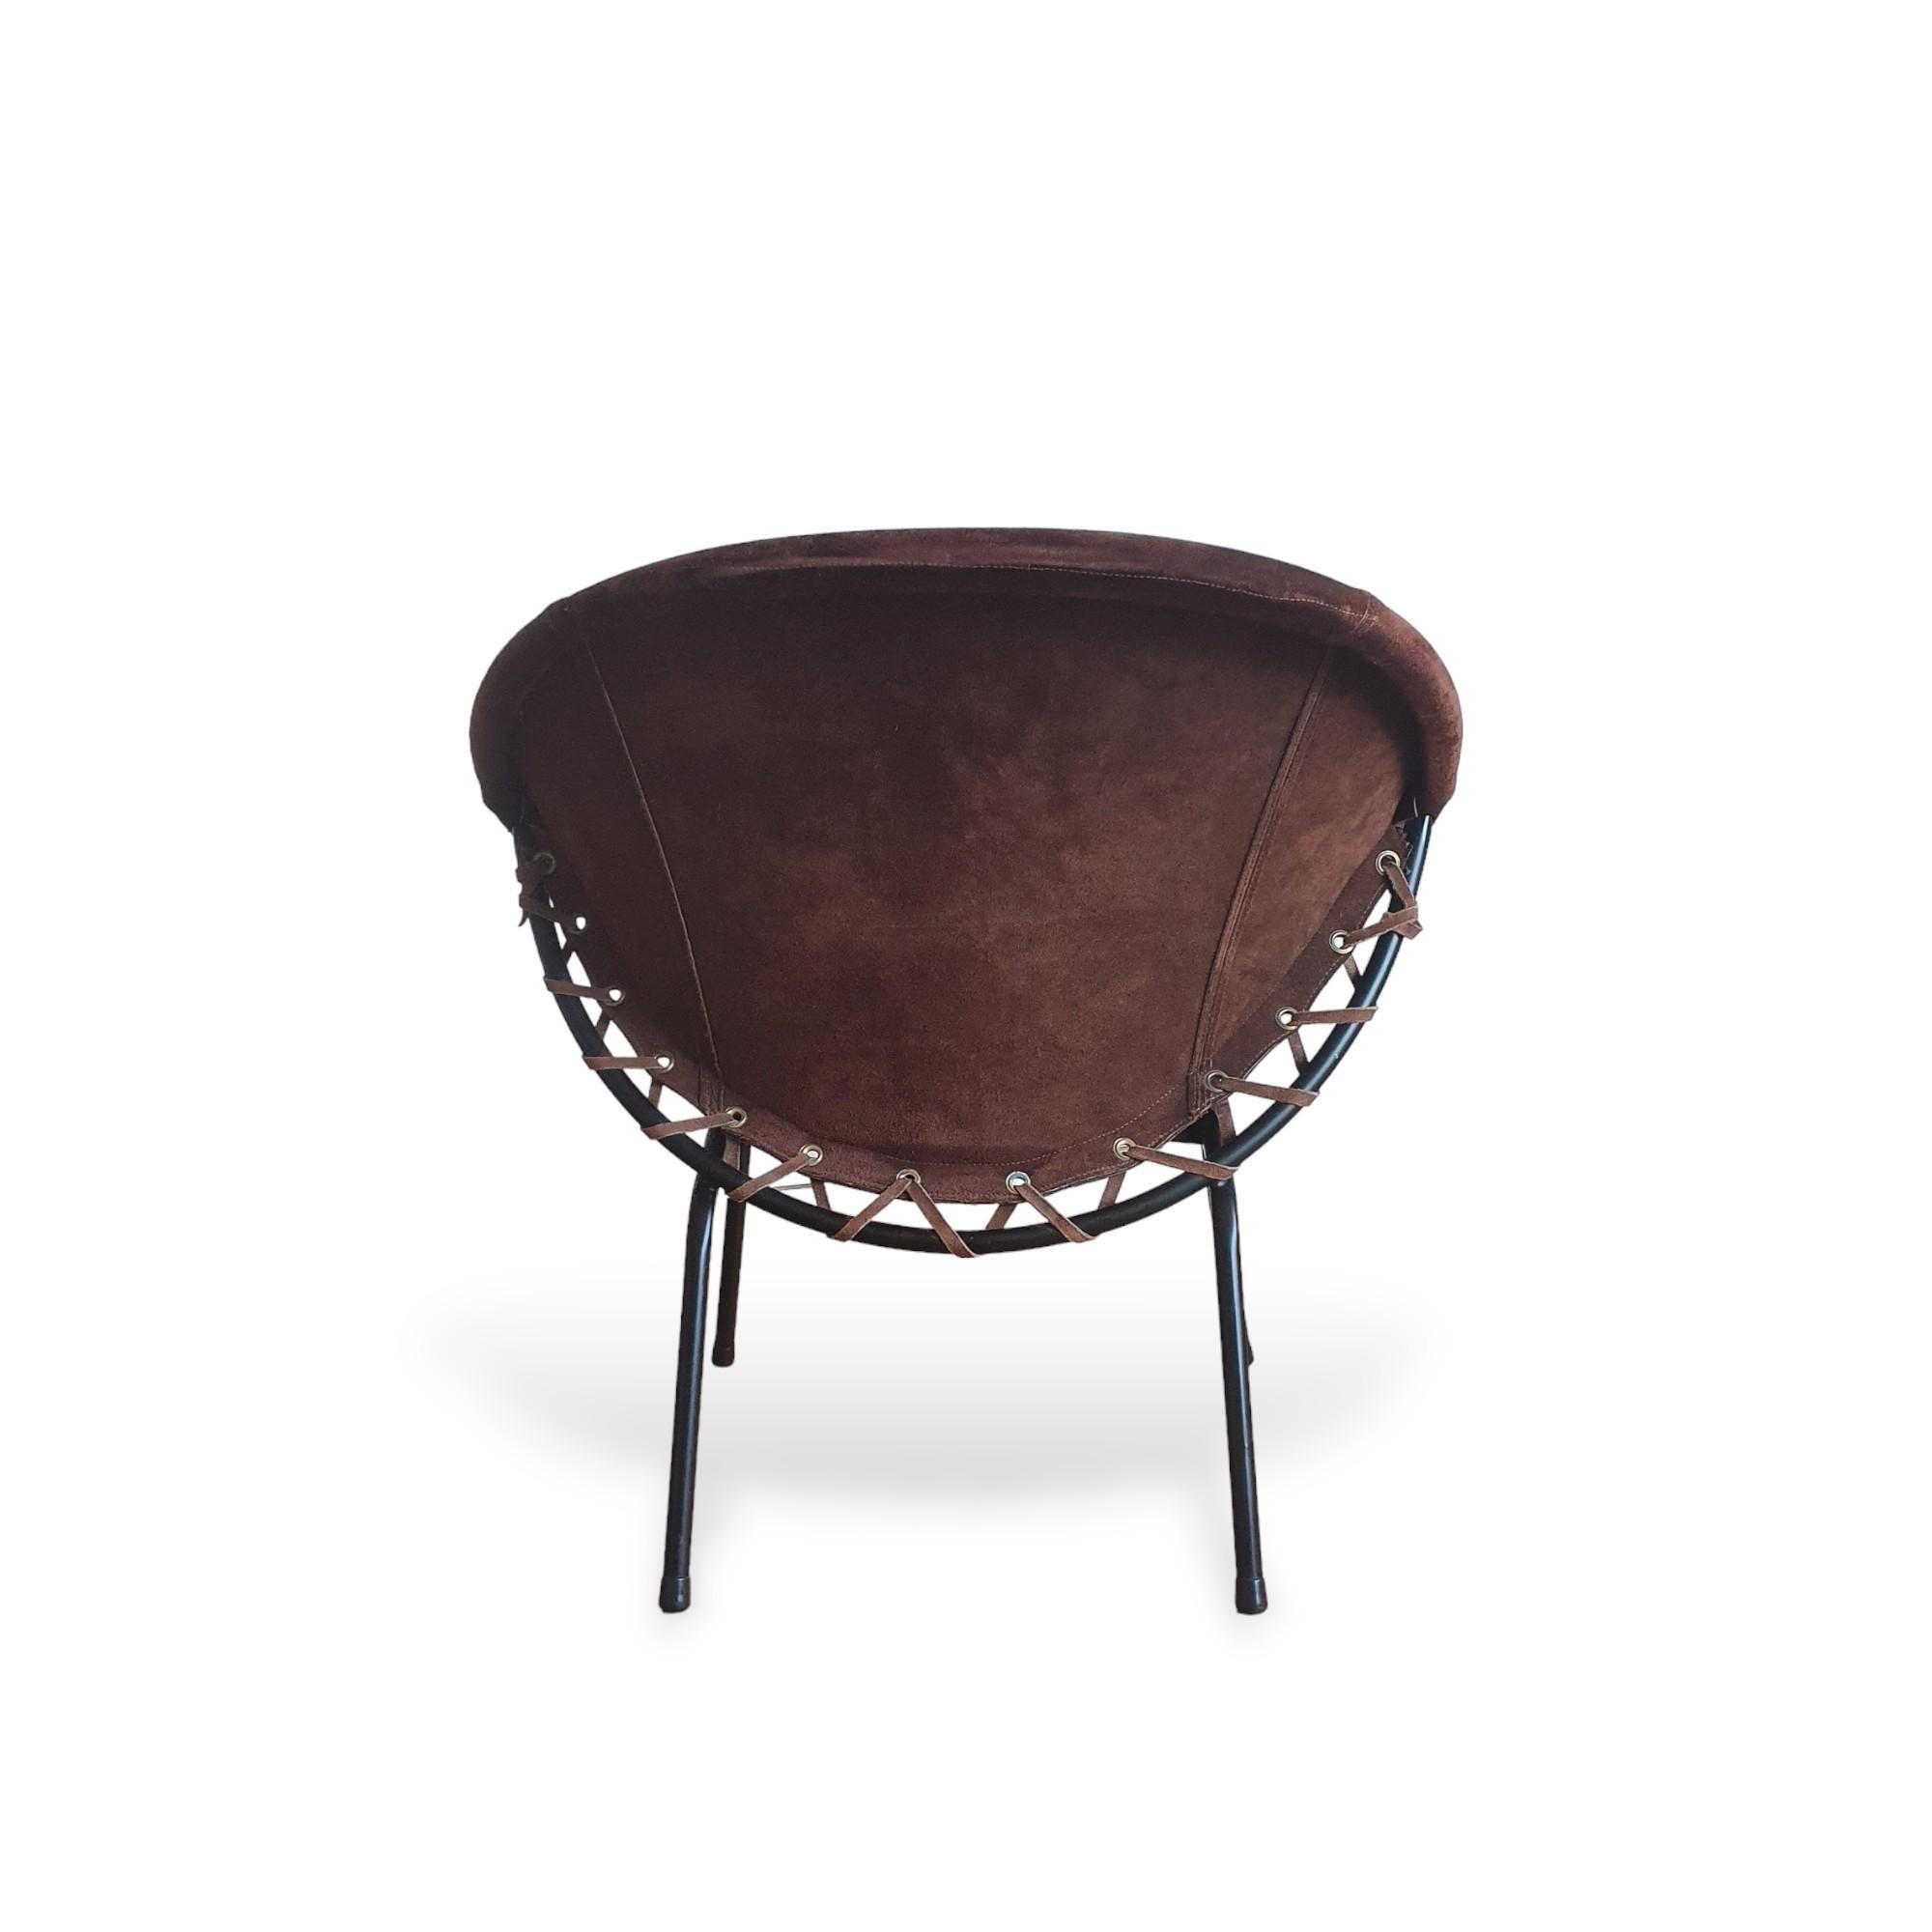 Mid-Century Modern Suede armchair, Lush &Co, Lusch Erzeugnis, Germany, 1960’s For Sale